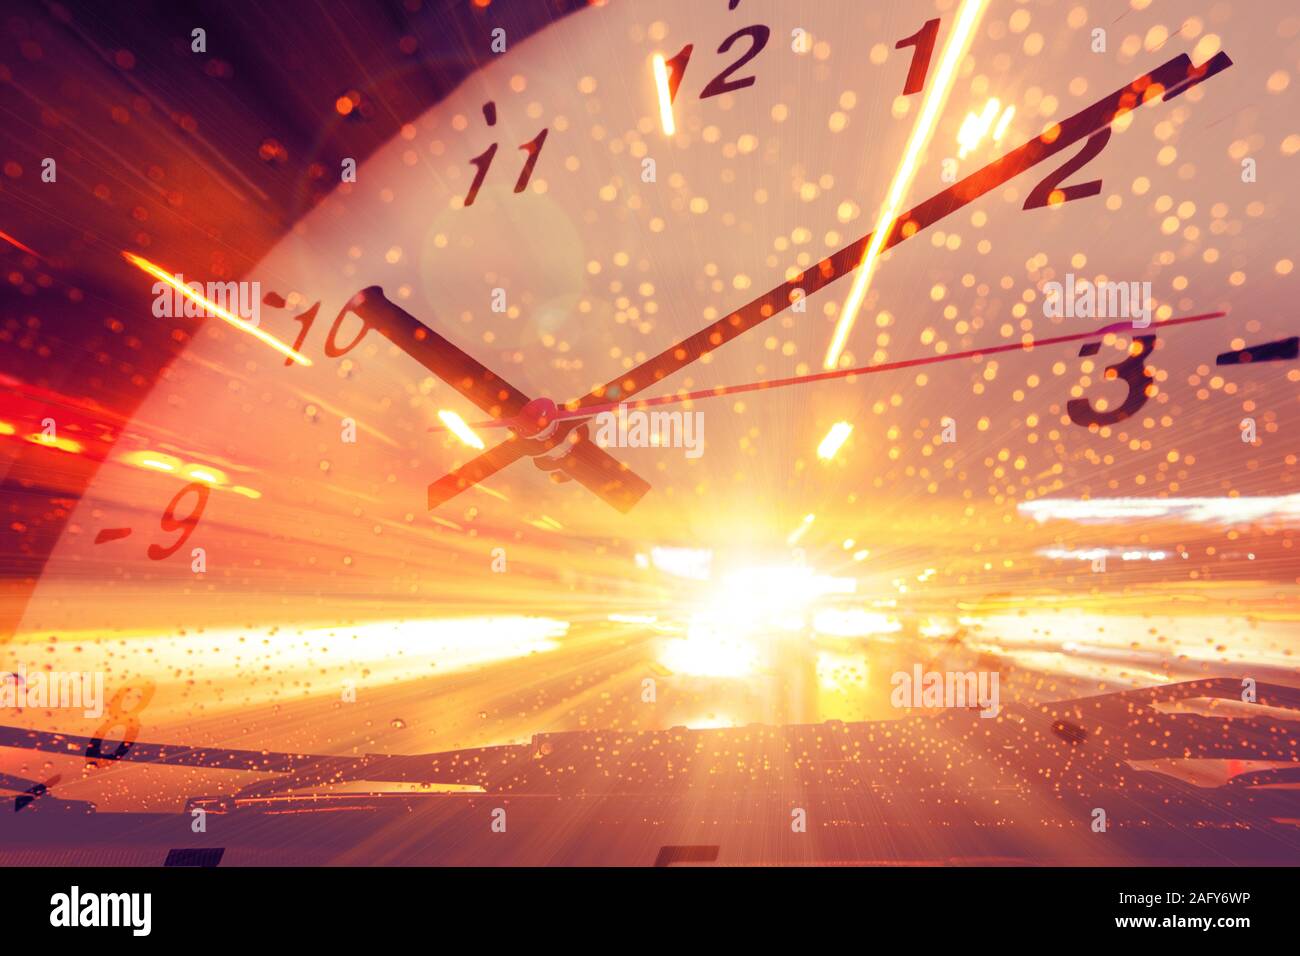 Timing fast speed car acceleration drive overlay with clock face for background. Stock Photo